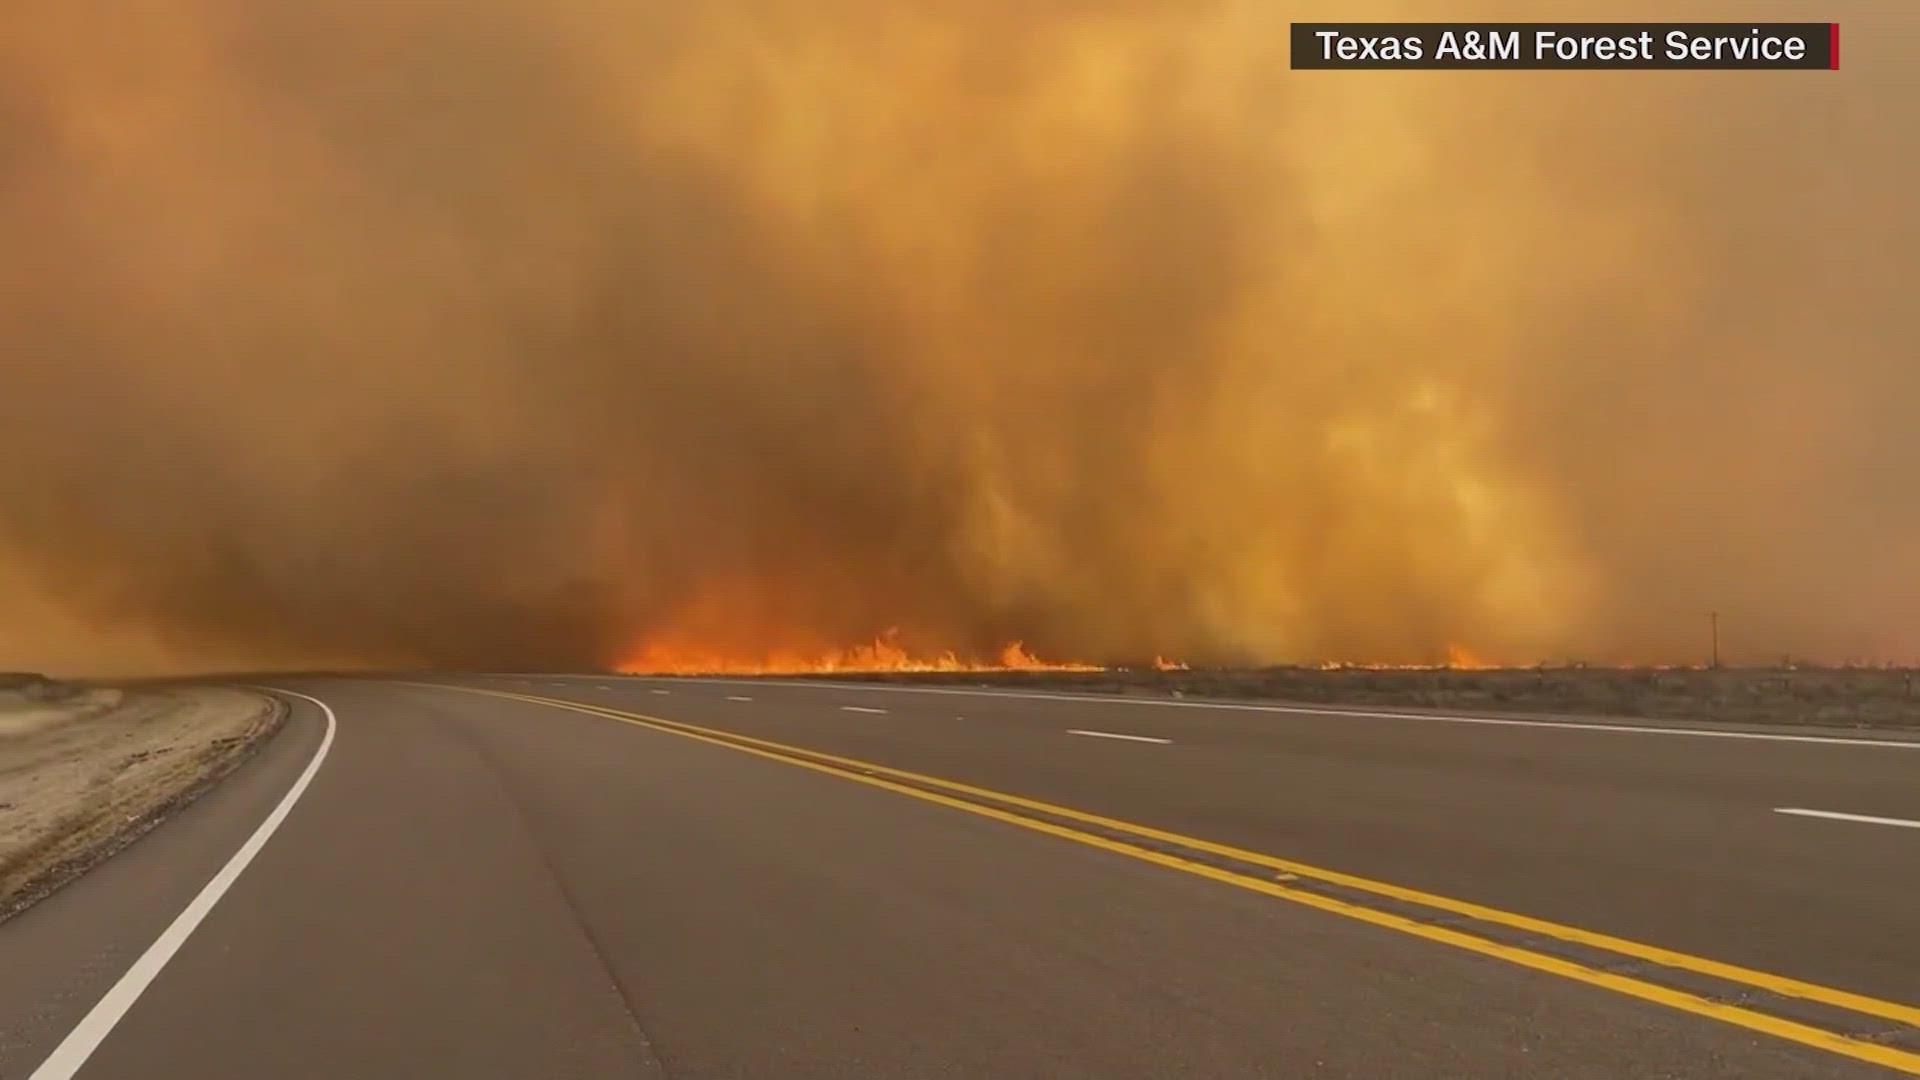 A wildfire spreading across the Texas Panhandle became the largest in state history Thursday, growing to nearly 1,700 square miles.